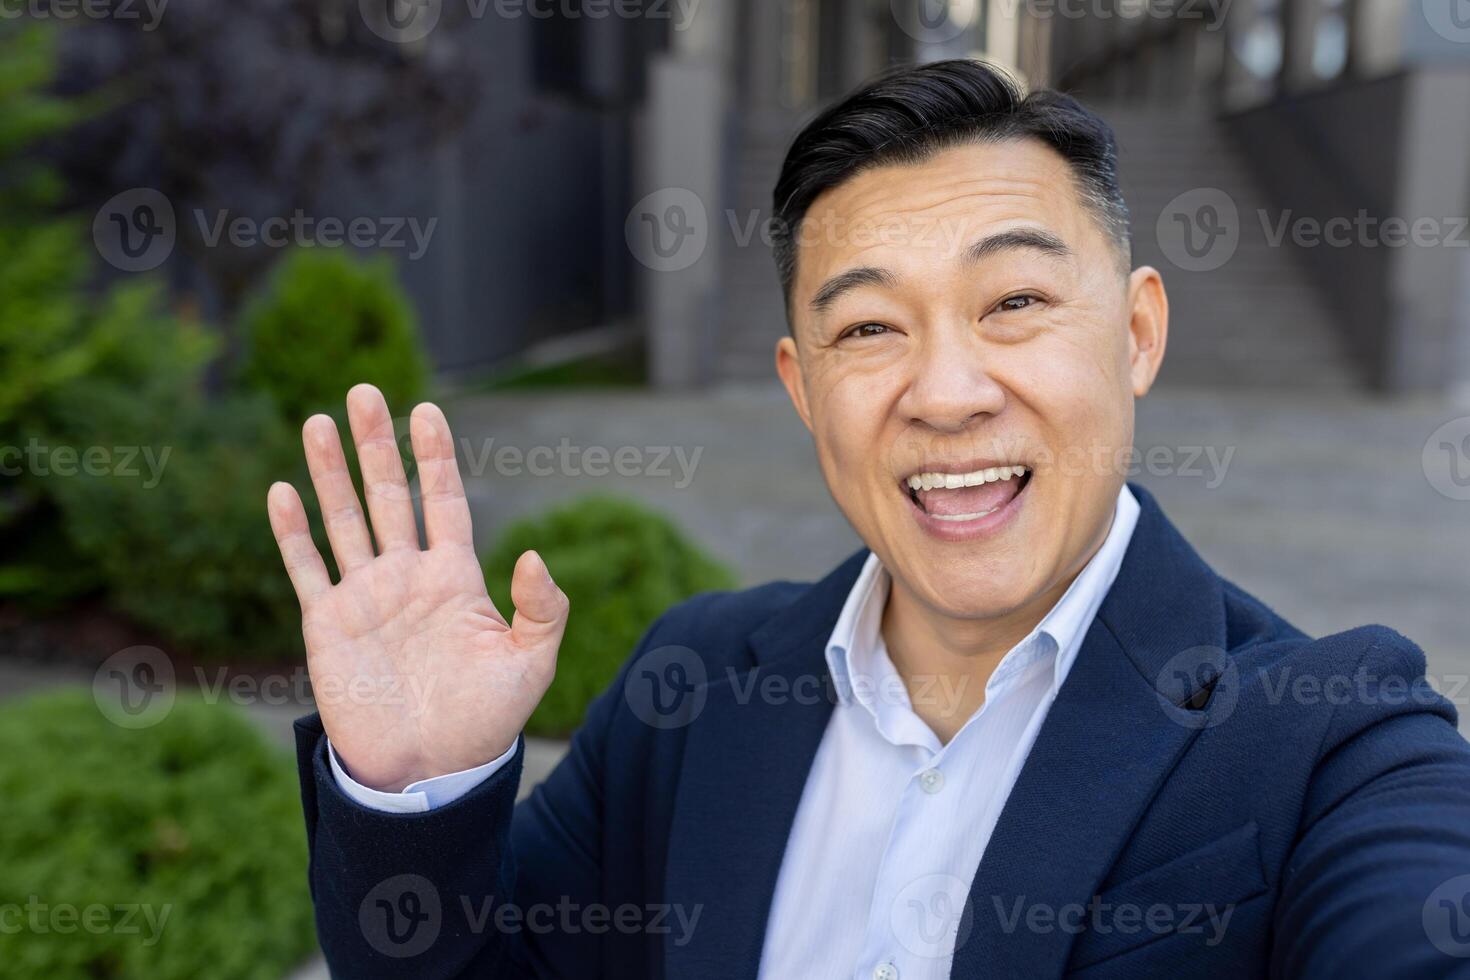 Close-up photo of a young Asian male businessman standing outside a building in a suit, talking on a call on the phone, greeting and waving at the camera.